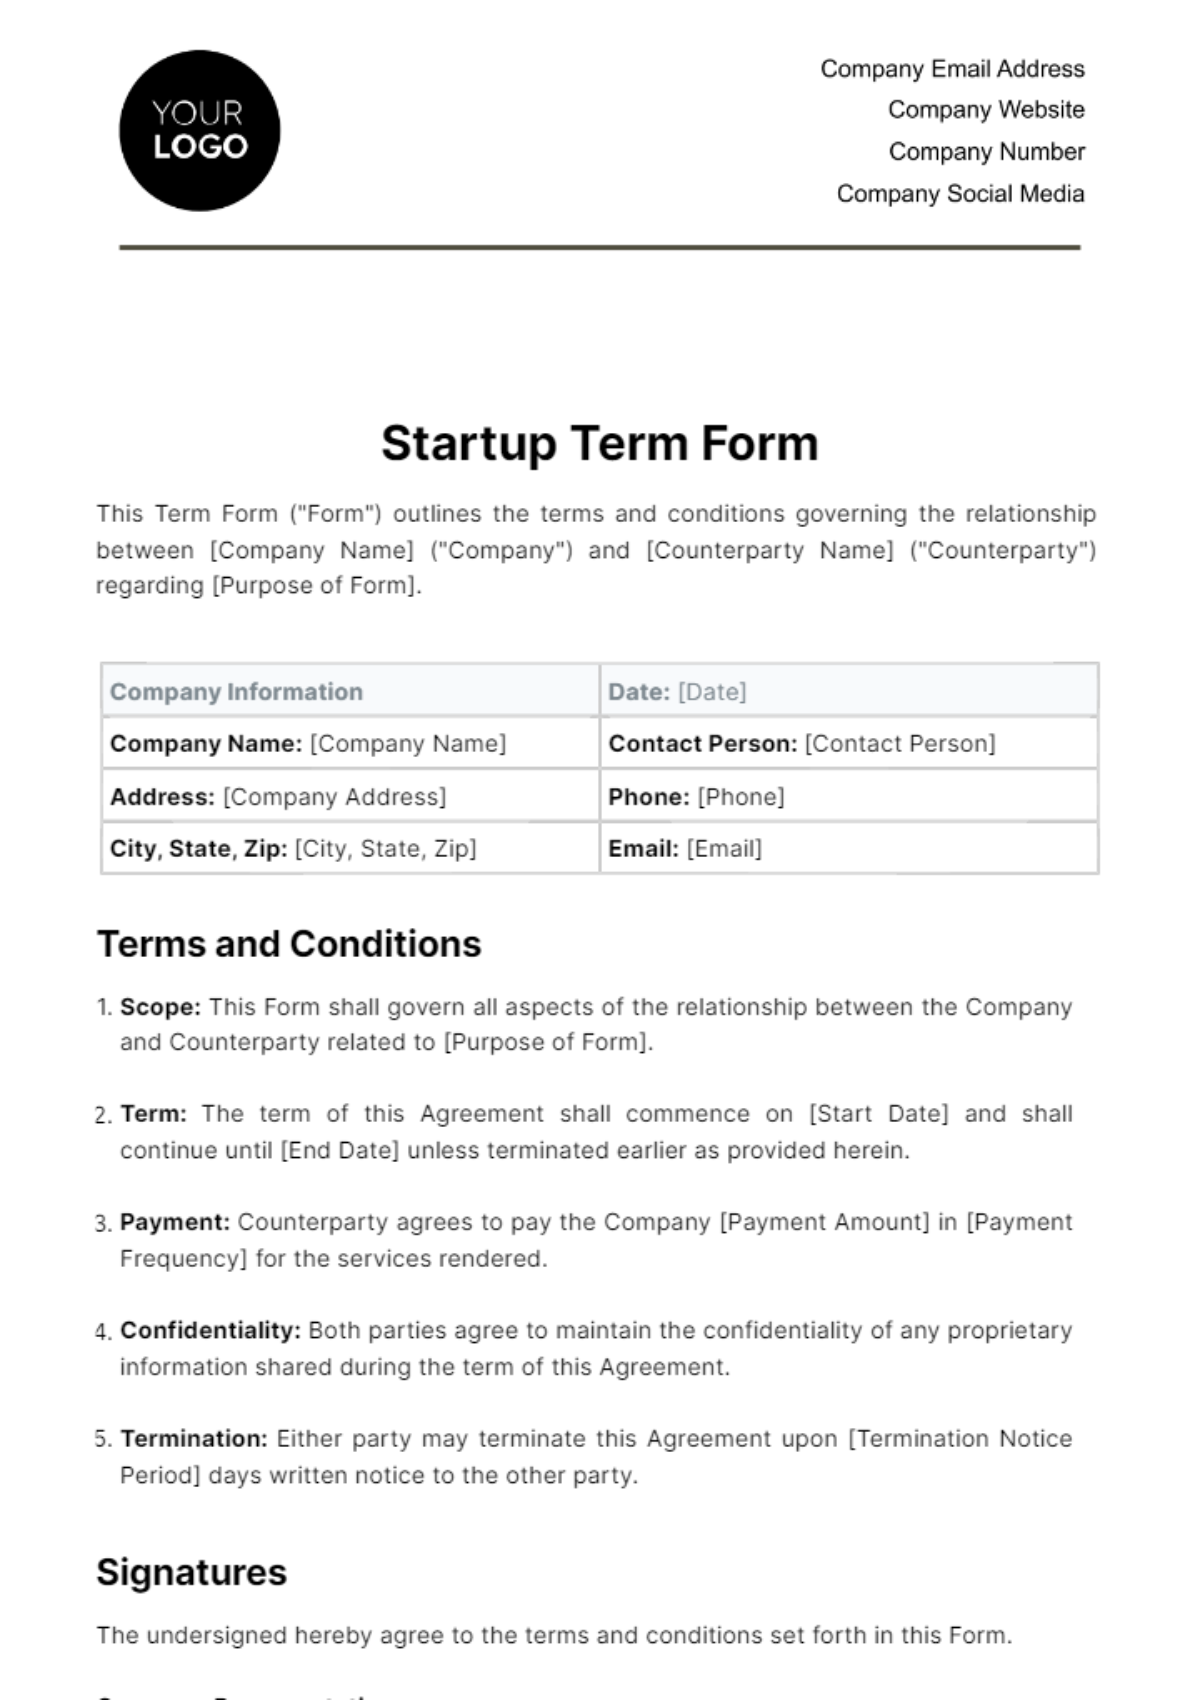 Startup Term Form Template